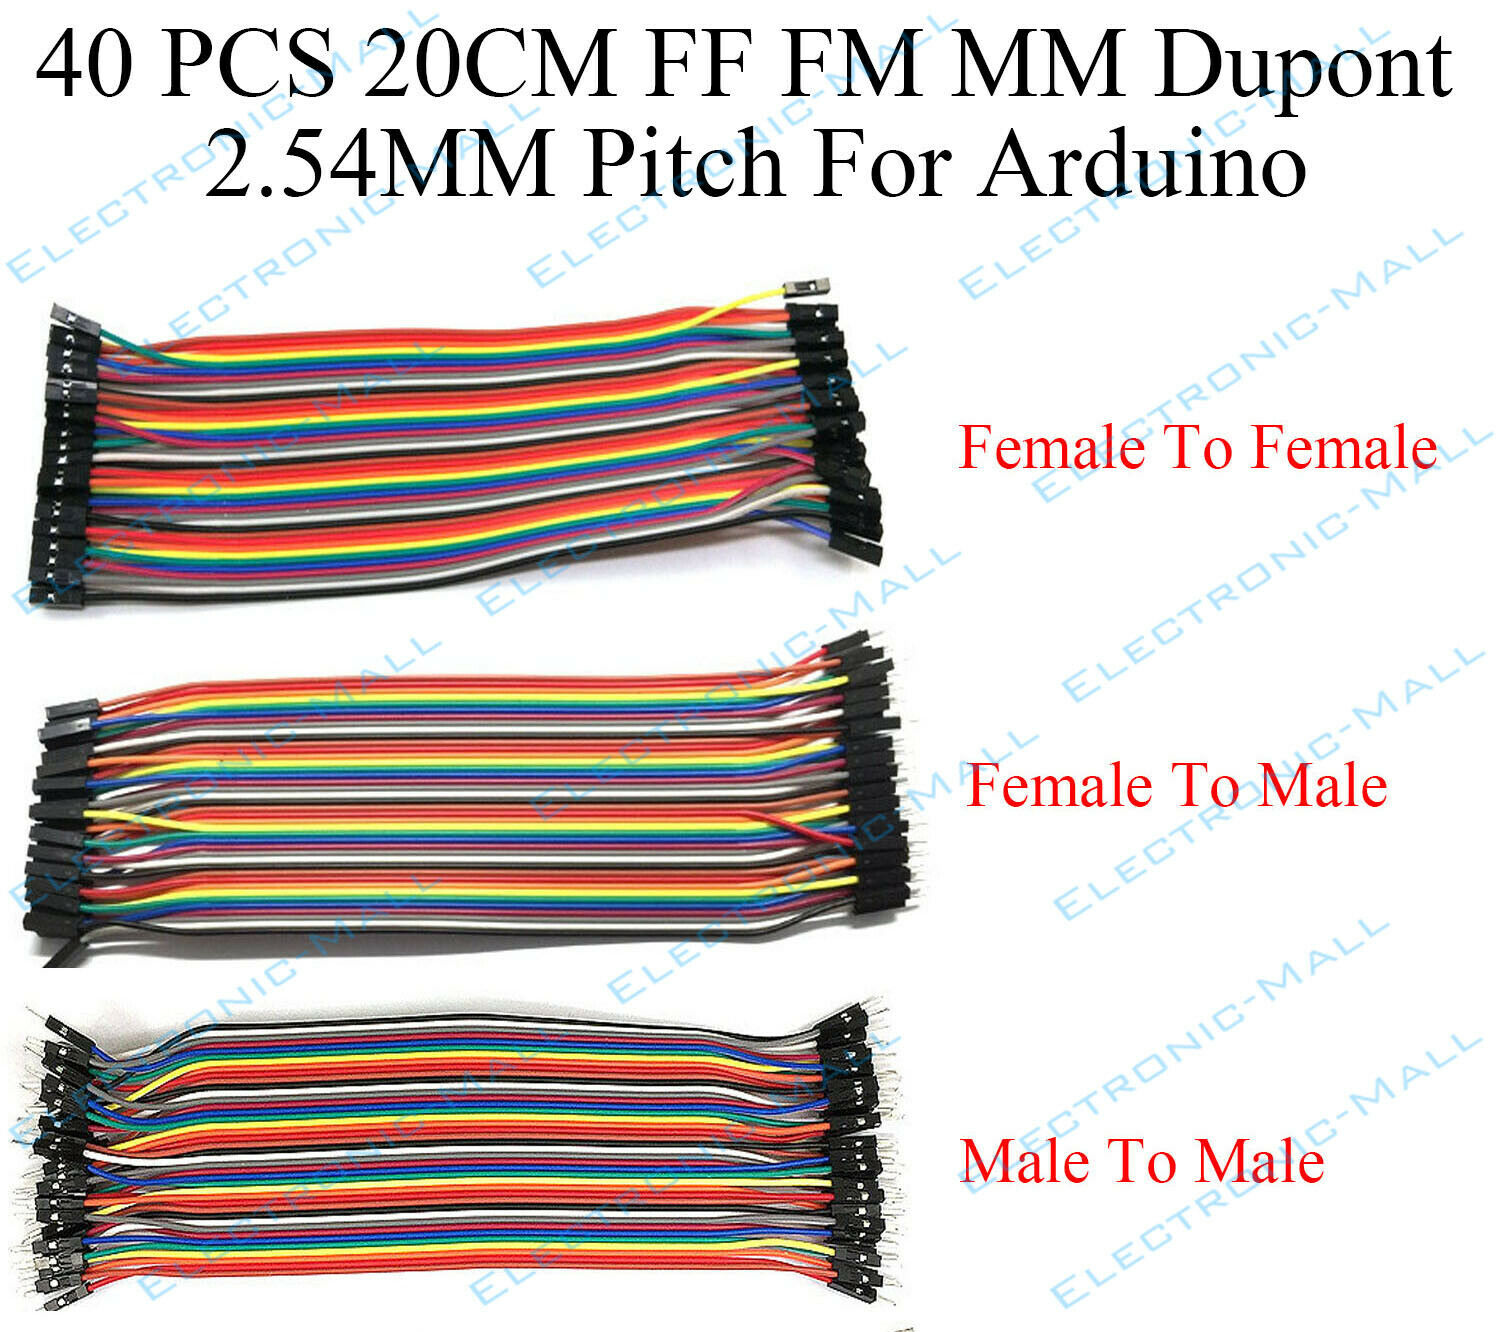 40pcs 20cm 2.54mm Ff Fm Mm Dupont Wire Jumper Cables Male To Female For Arduino